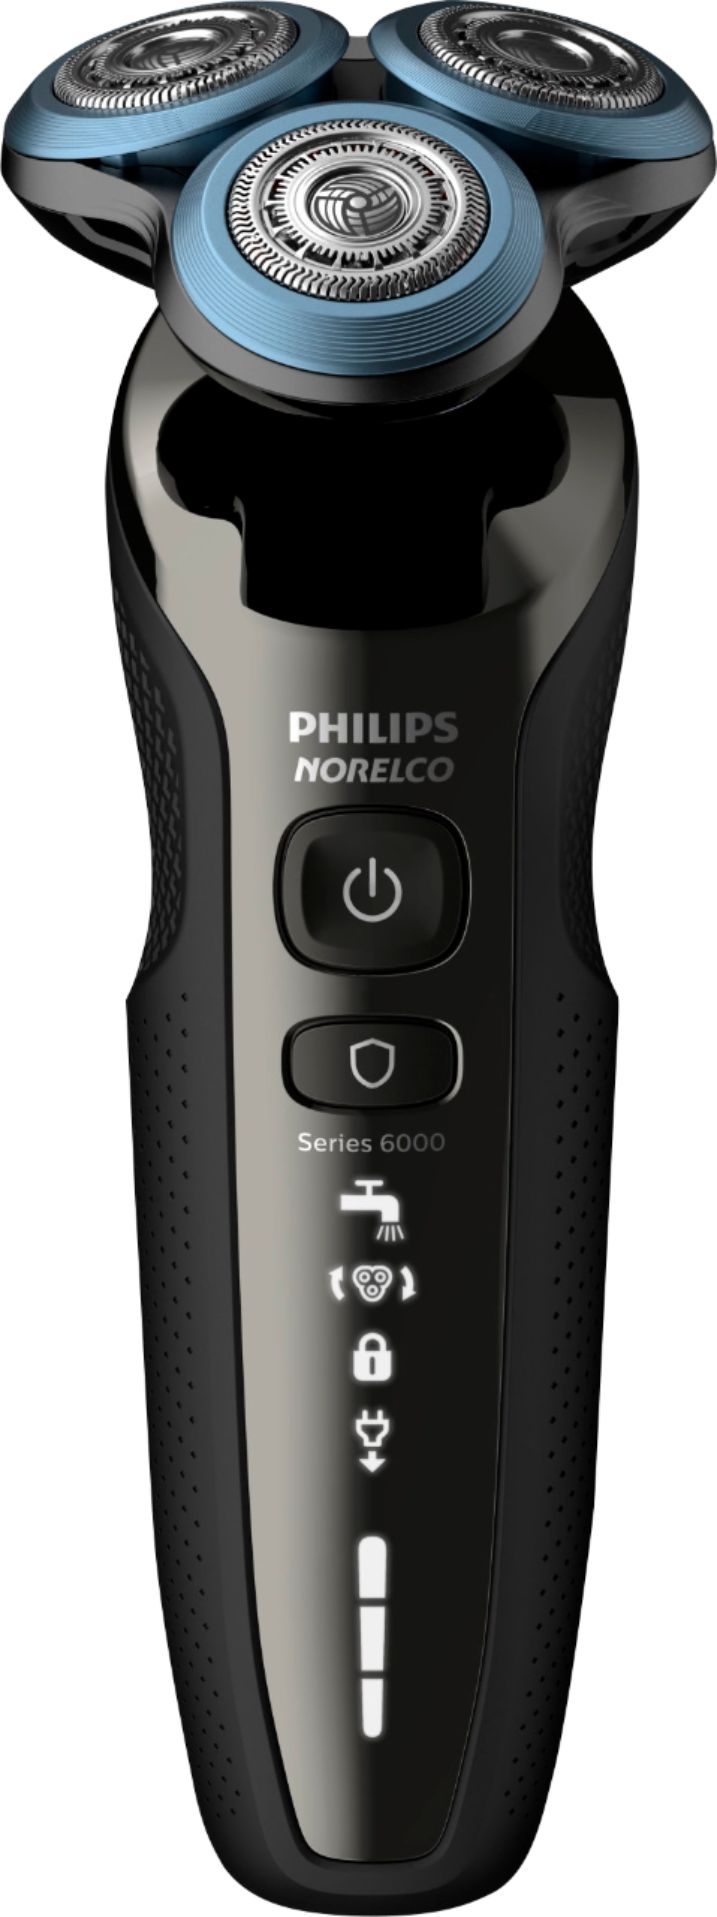 Customer Reviews Philips Norelco Series 6000 Smartclick Wet Dry Electric Shaver Black S6880 81